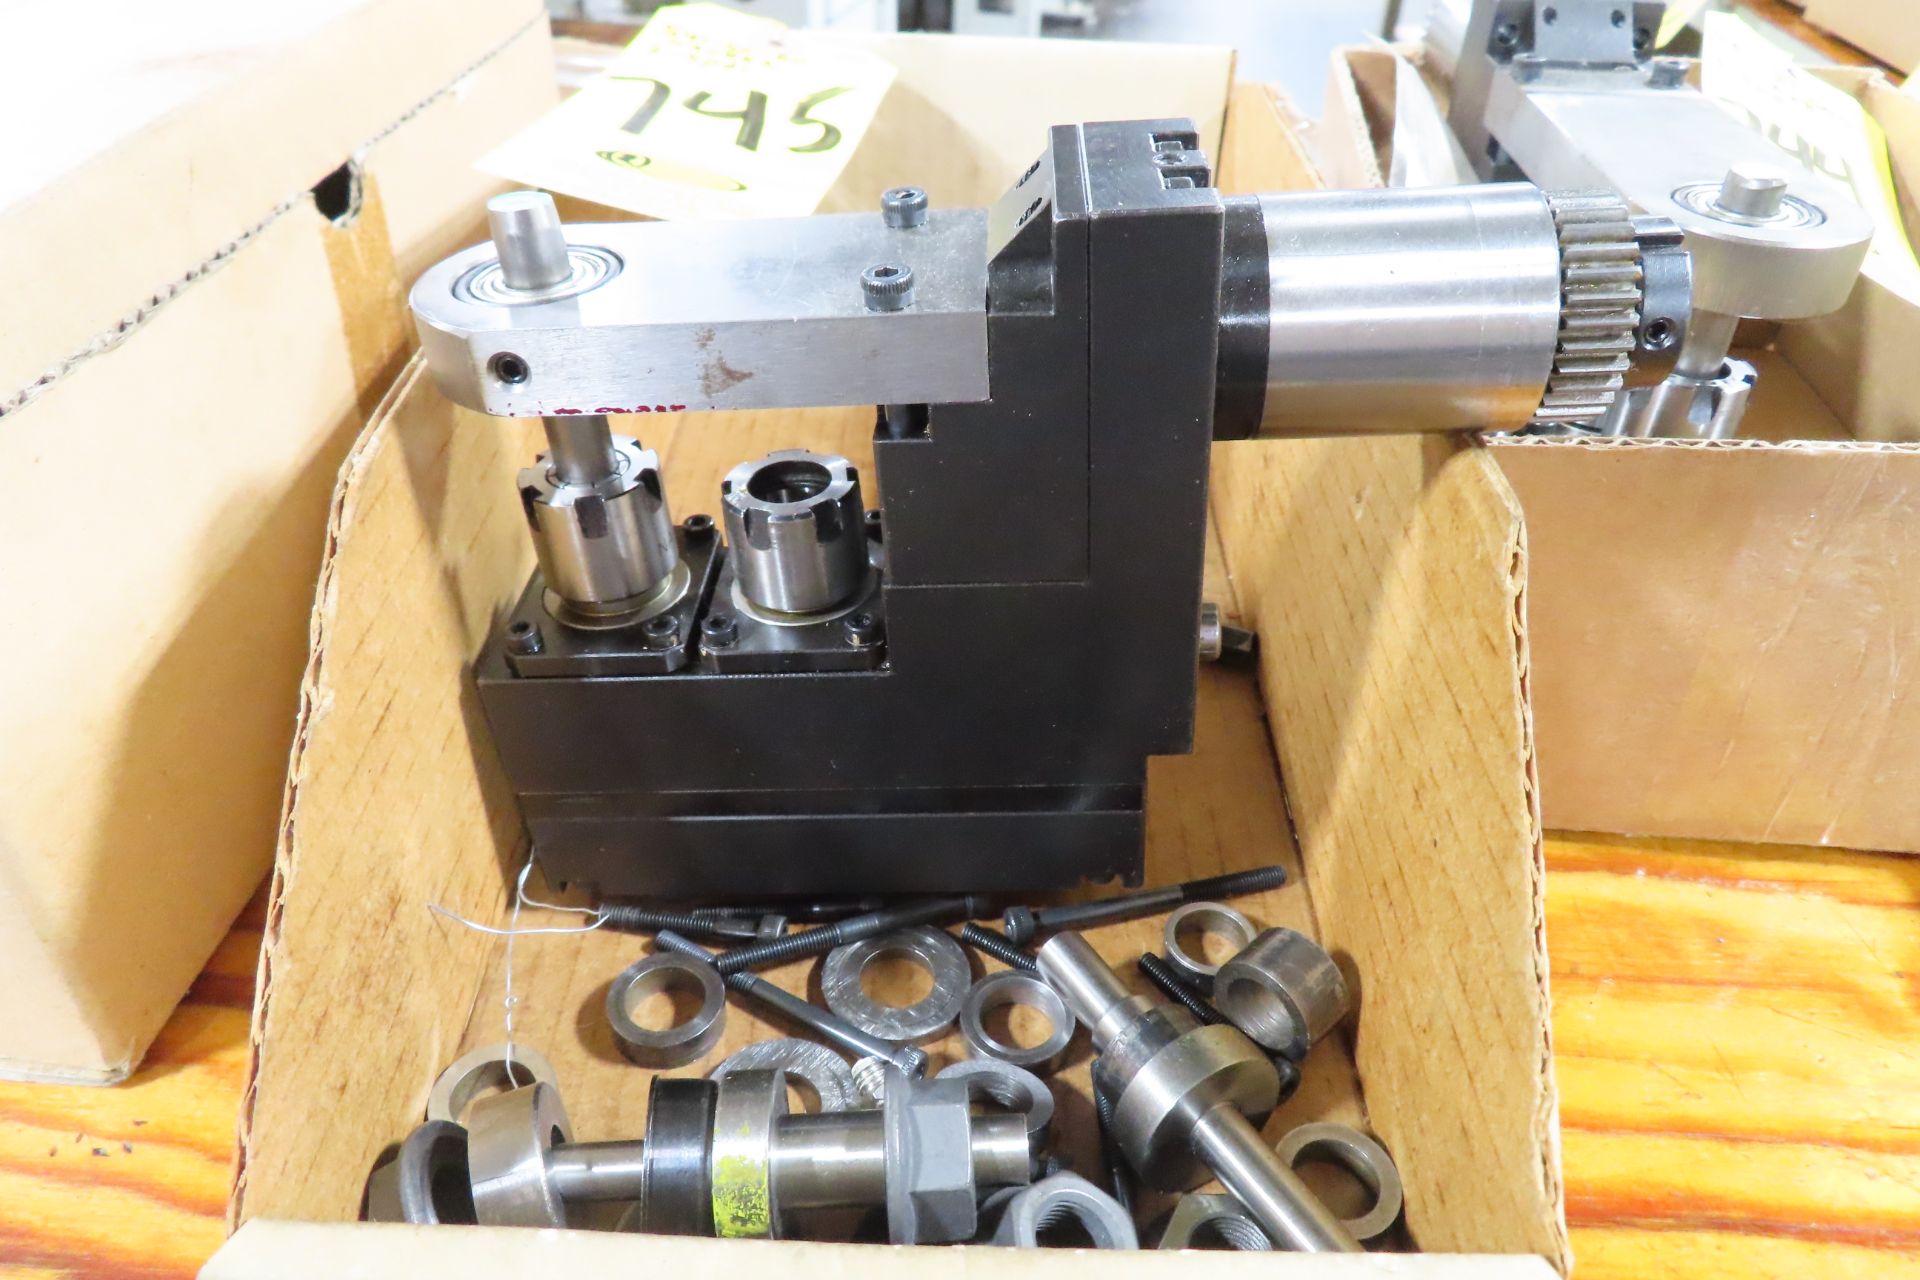 STAR 541-550-00, S/N 030852, 2 SPINDLE FRONT WORKING LIVE (DRILLING) TOOL - Image 5 of 6